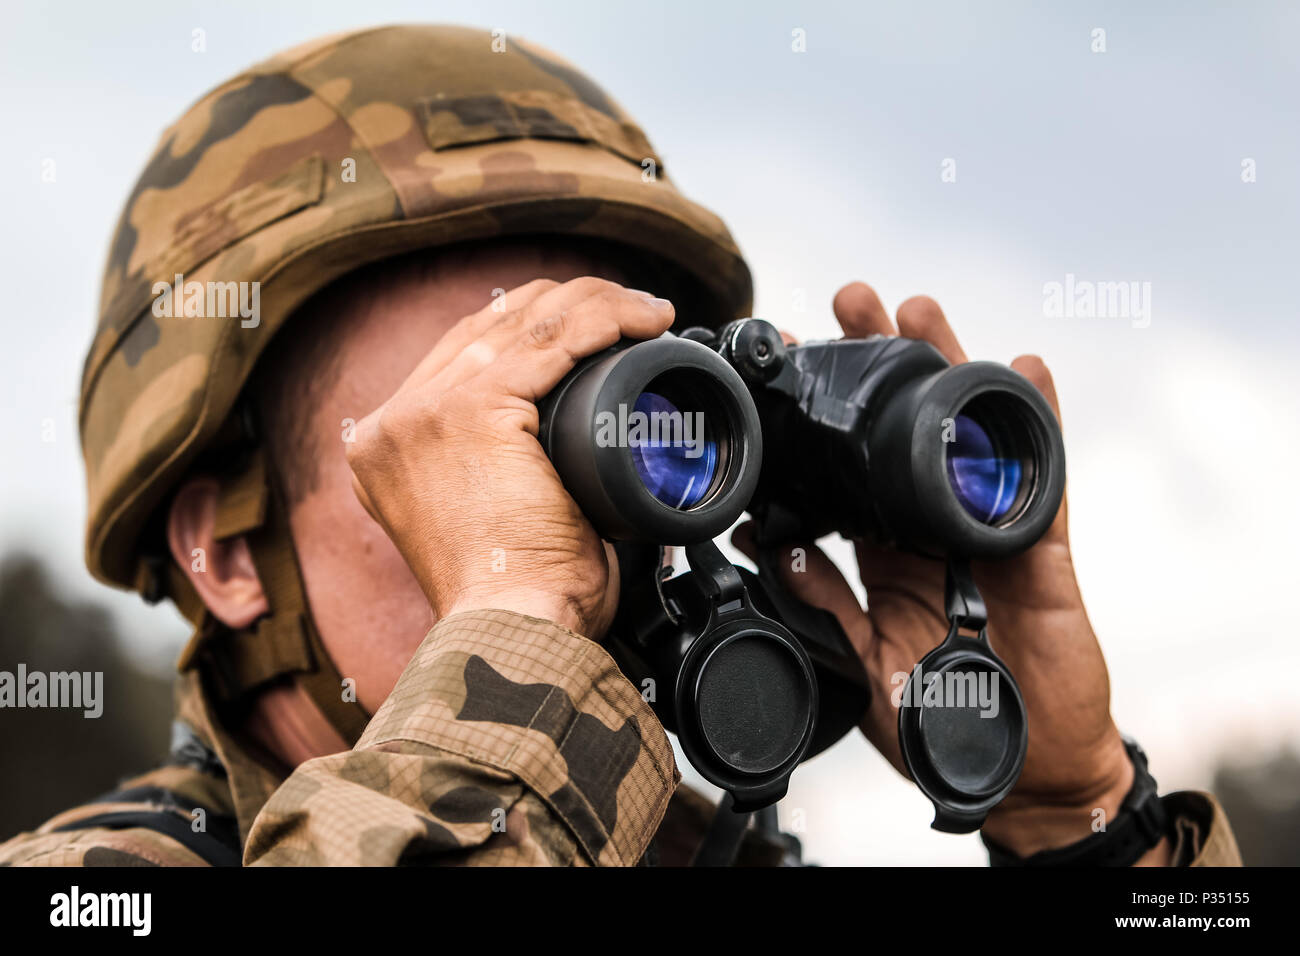 A Polish army soldier with 15th Mechanized Brigade, uses binoculars to conduct reconnaissance during a multinational training event for exercise Puma 2 with Battle Group Poland at Bemowo Piskie Training Area, Poland on June 14, 2018 as part of Saber Strike 18. This year's exercise, which runs from June 3-15, tests allies and partners from 19 countries on their ability work together to deter aggression in the region and improve each unit's ability to perform their designated mission. (U.S. Army photo by Spc. Hubert D. Delany III /22nd Mobile Public Affairs Detachment) Stock Photo